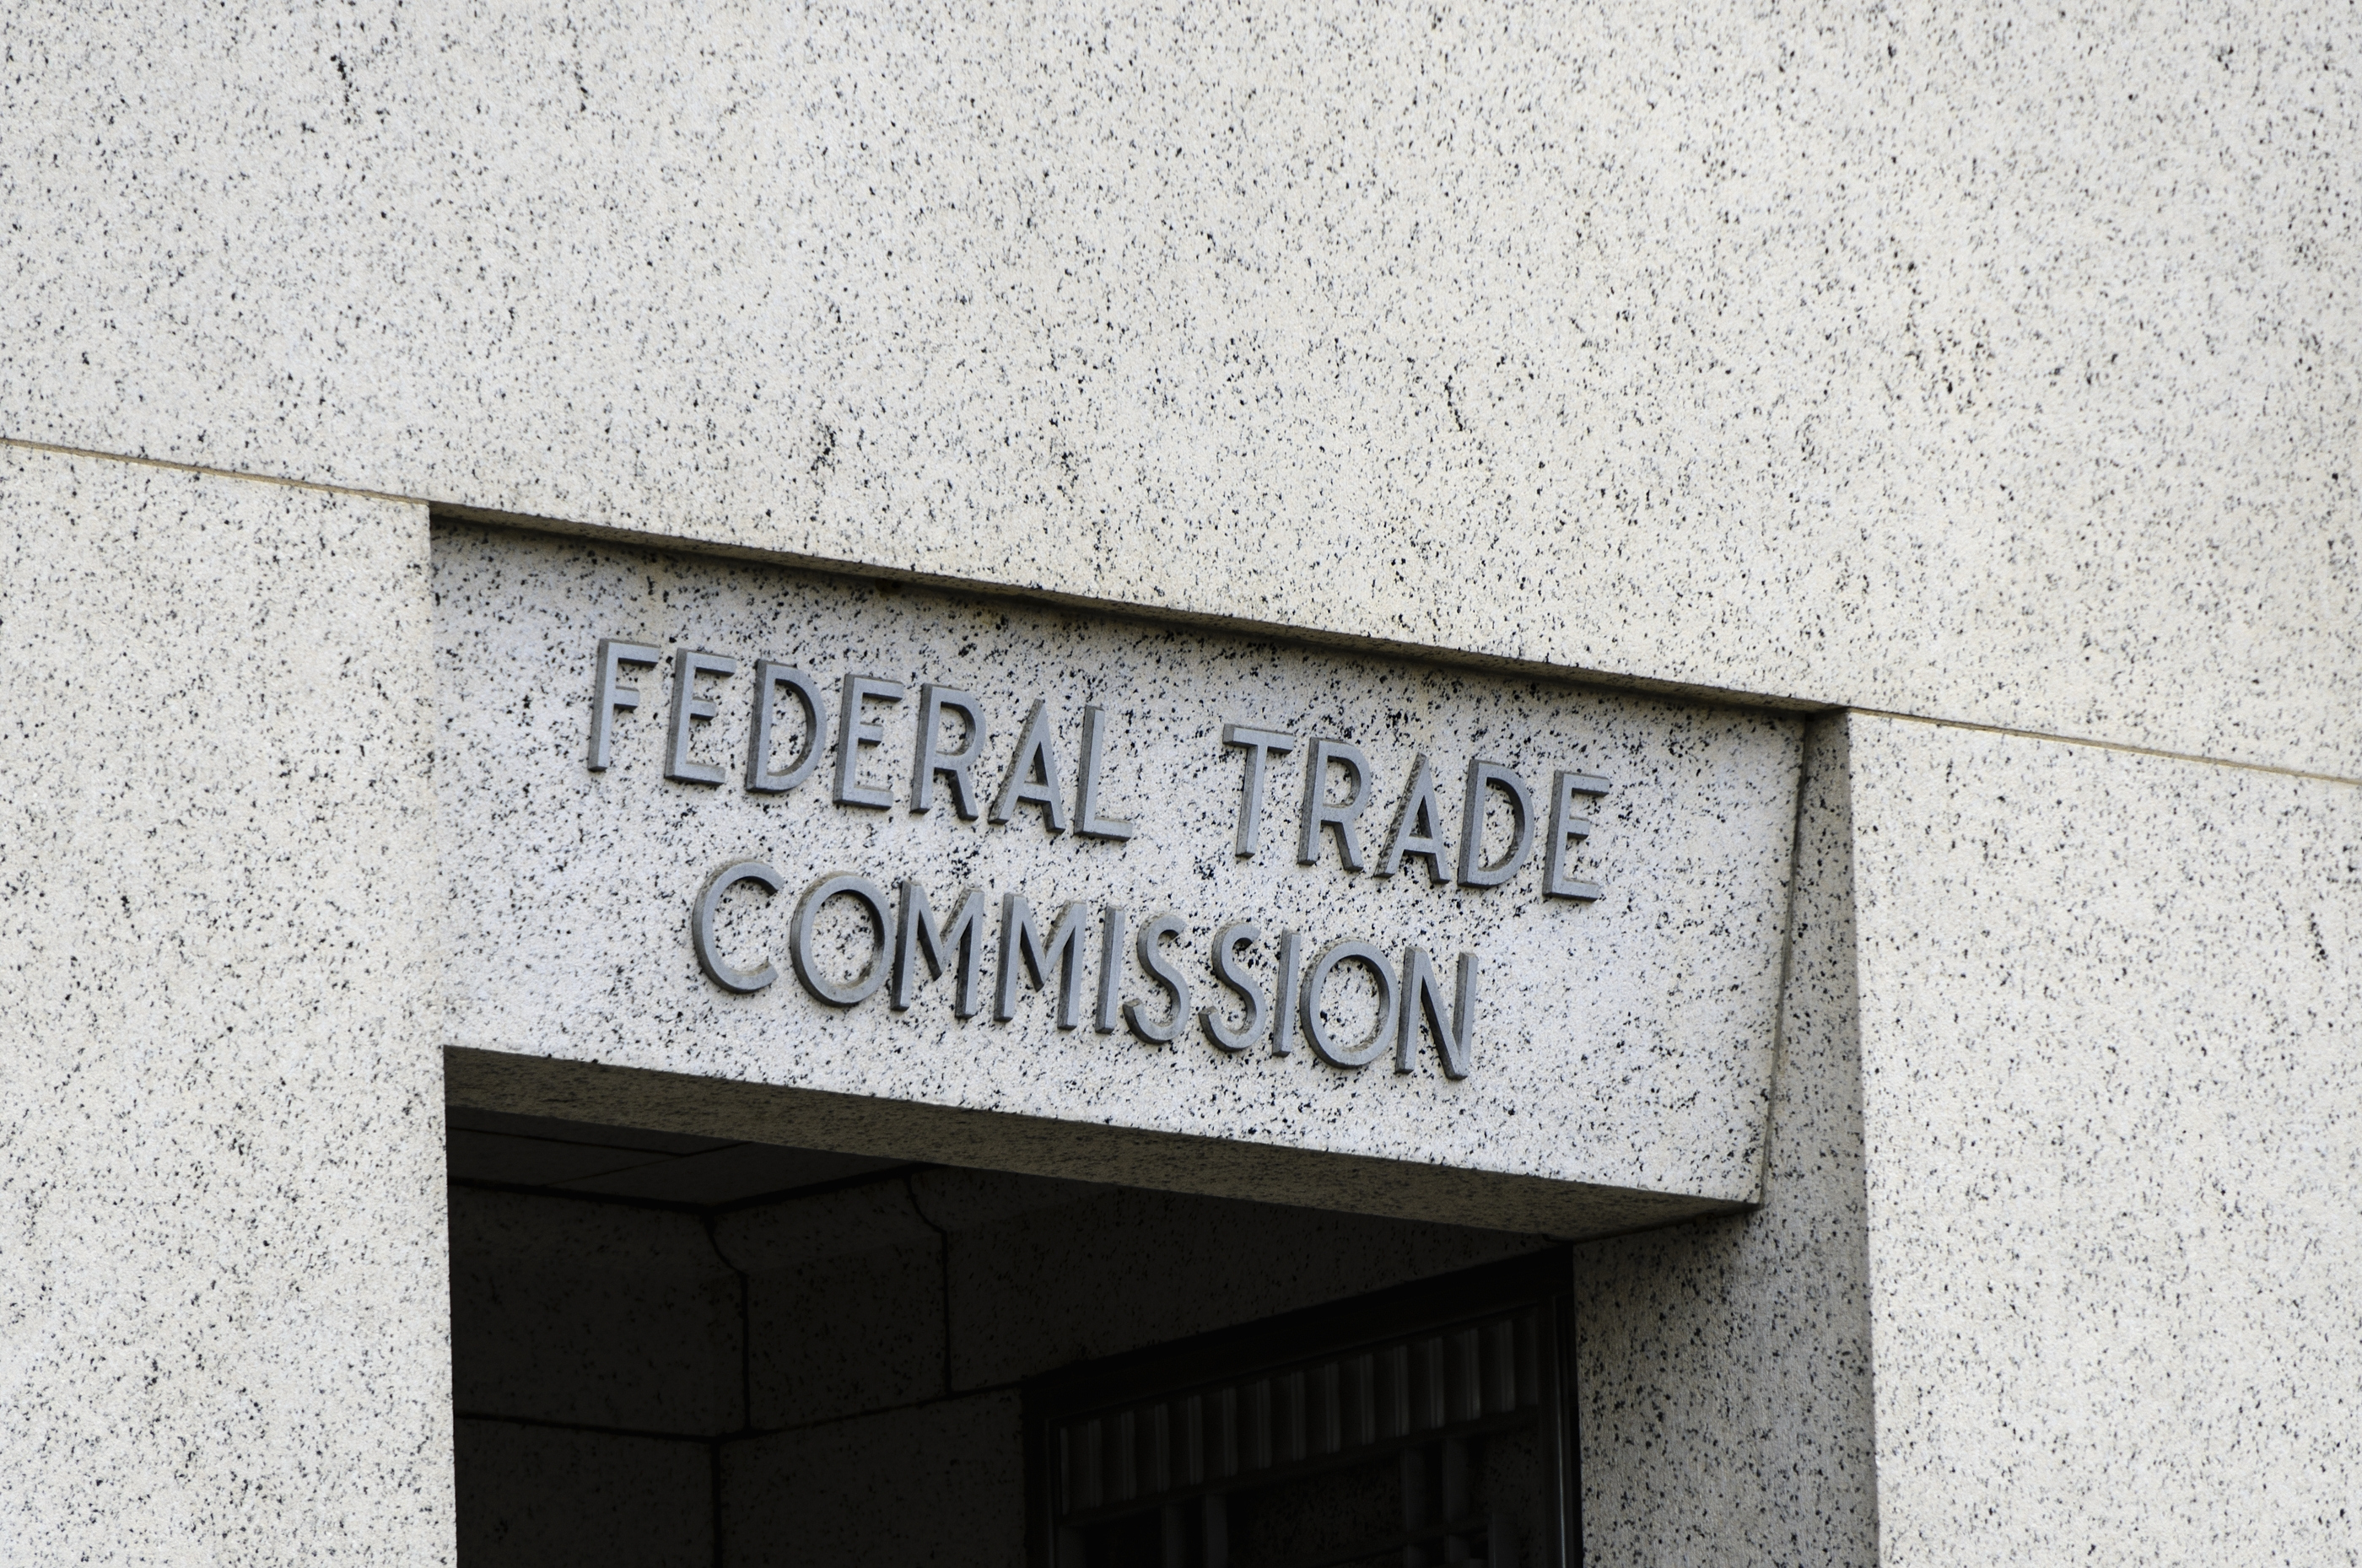 federal trade commission act